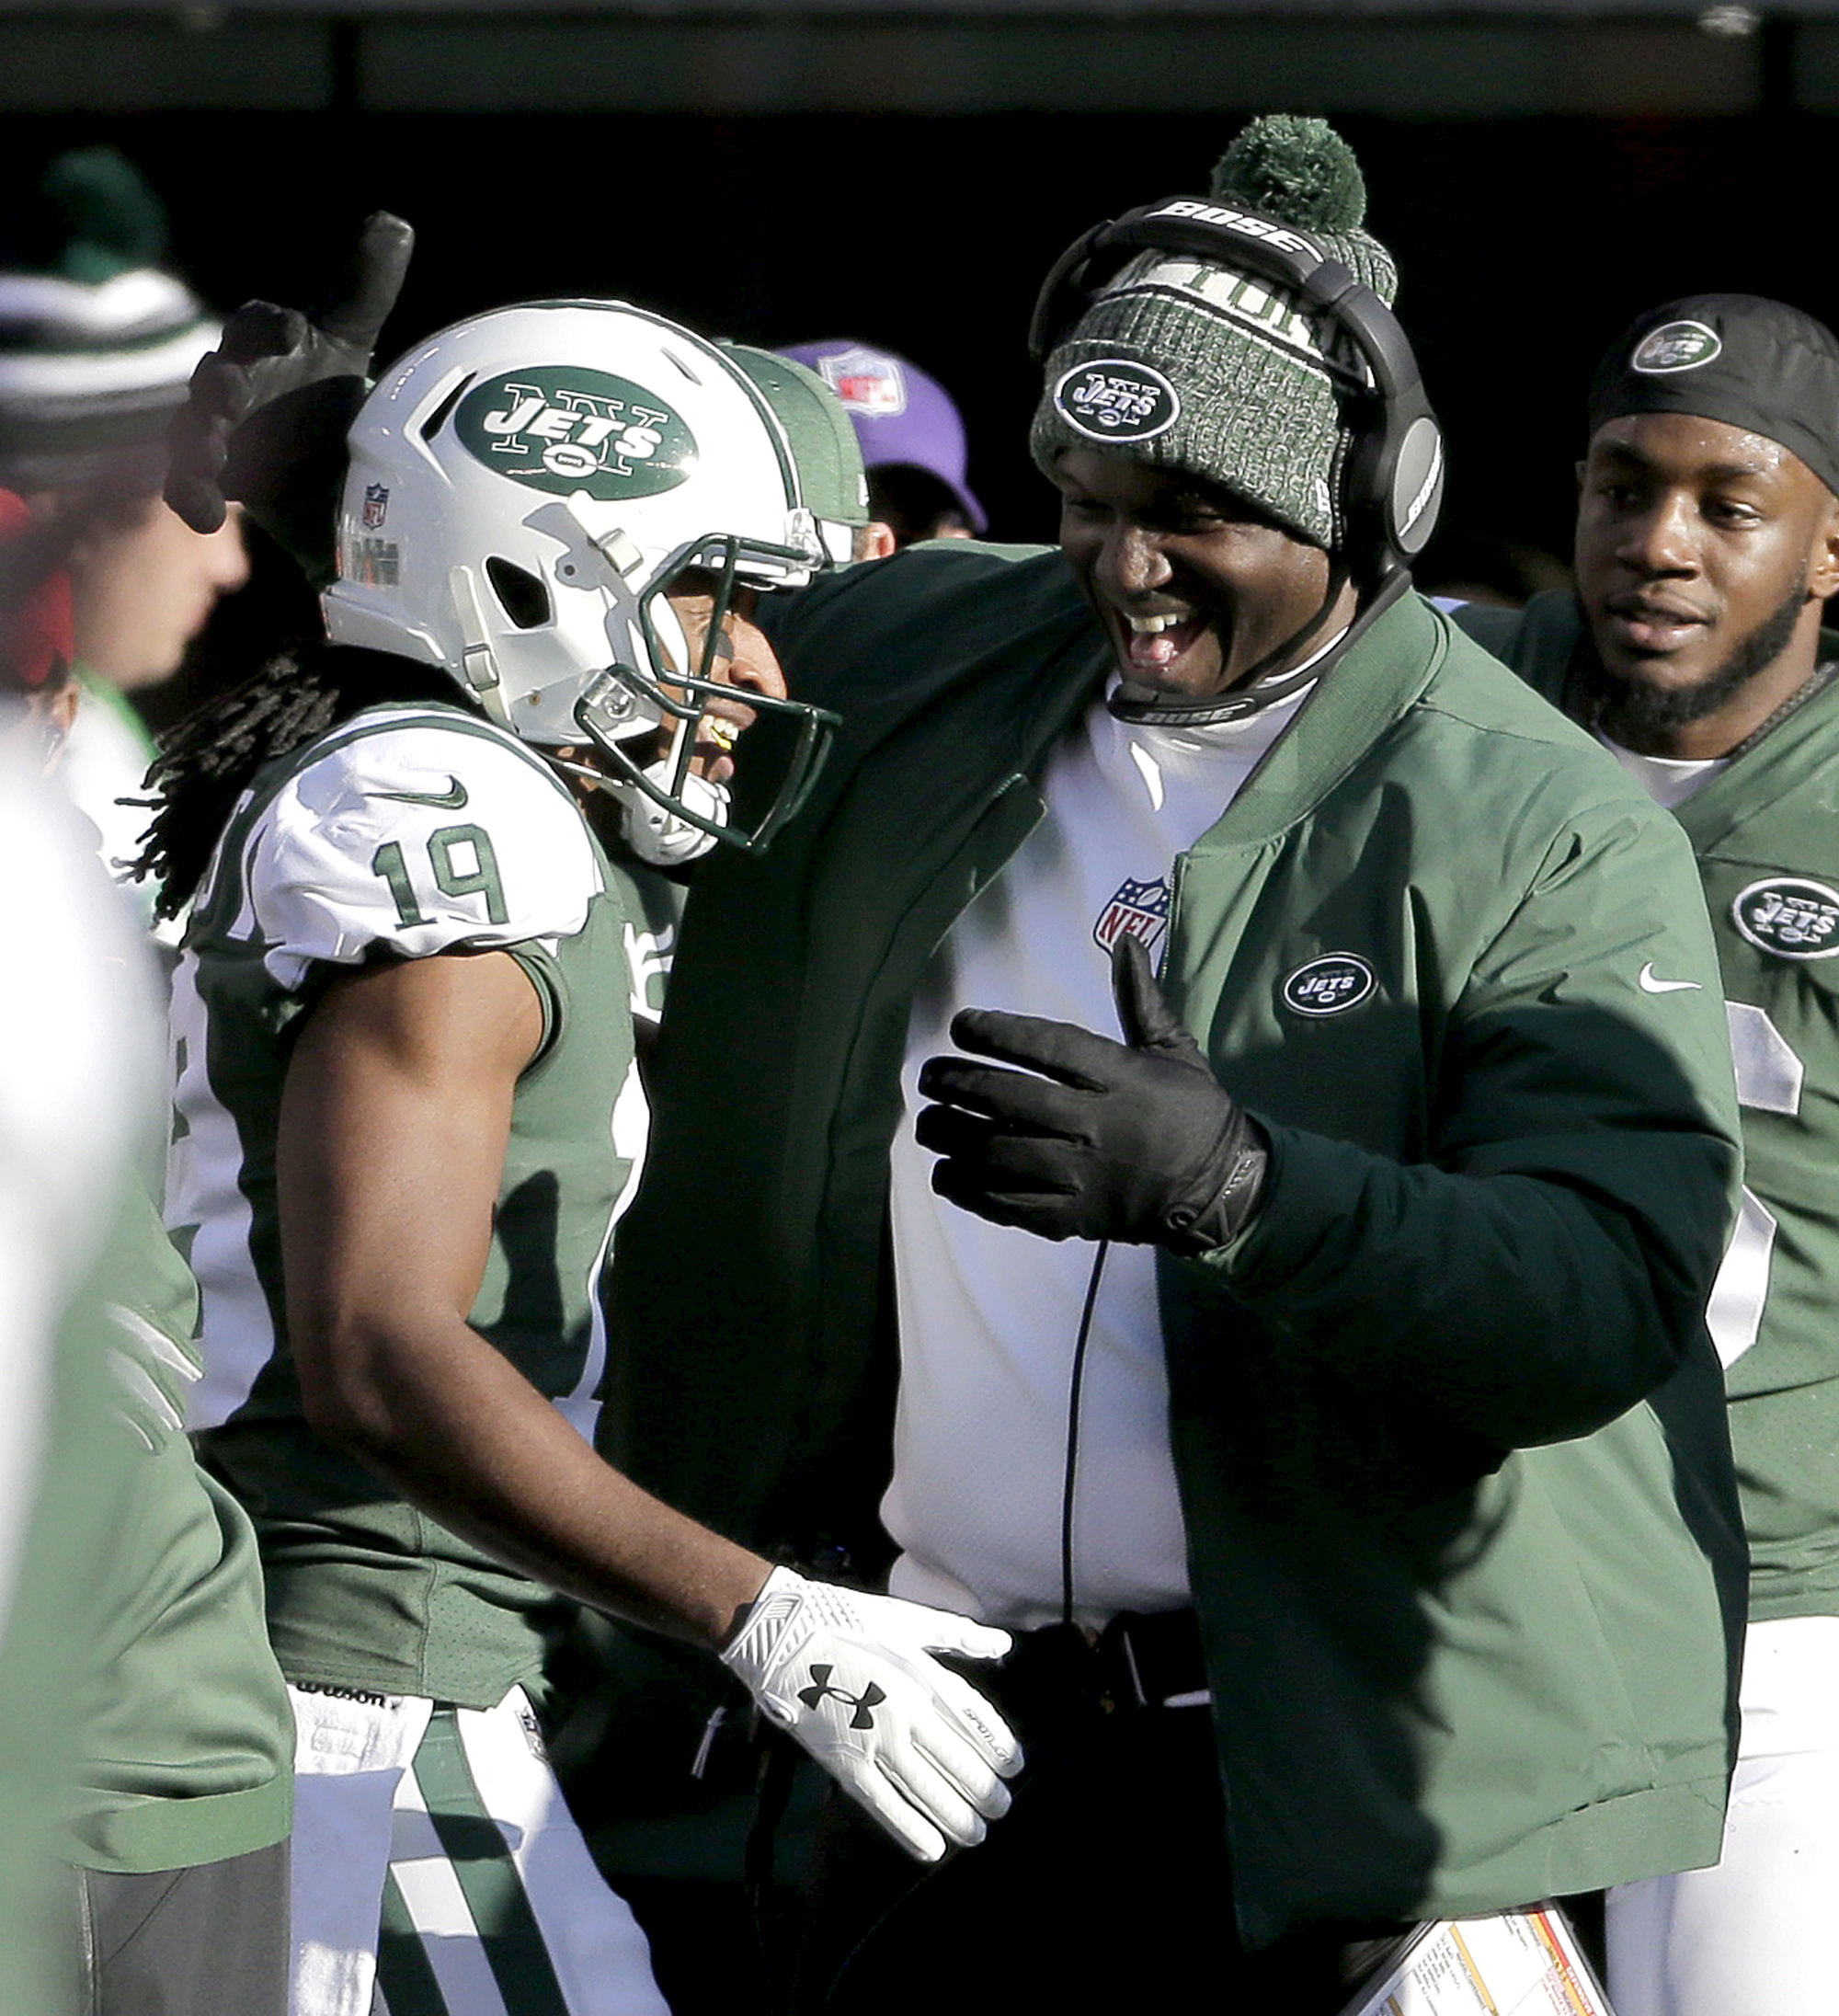 Todd Bowles mum on future with Jets despite rumors